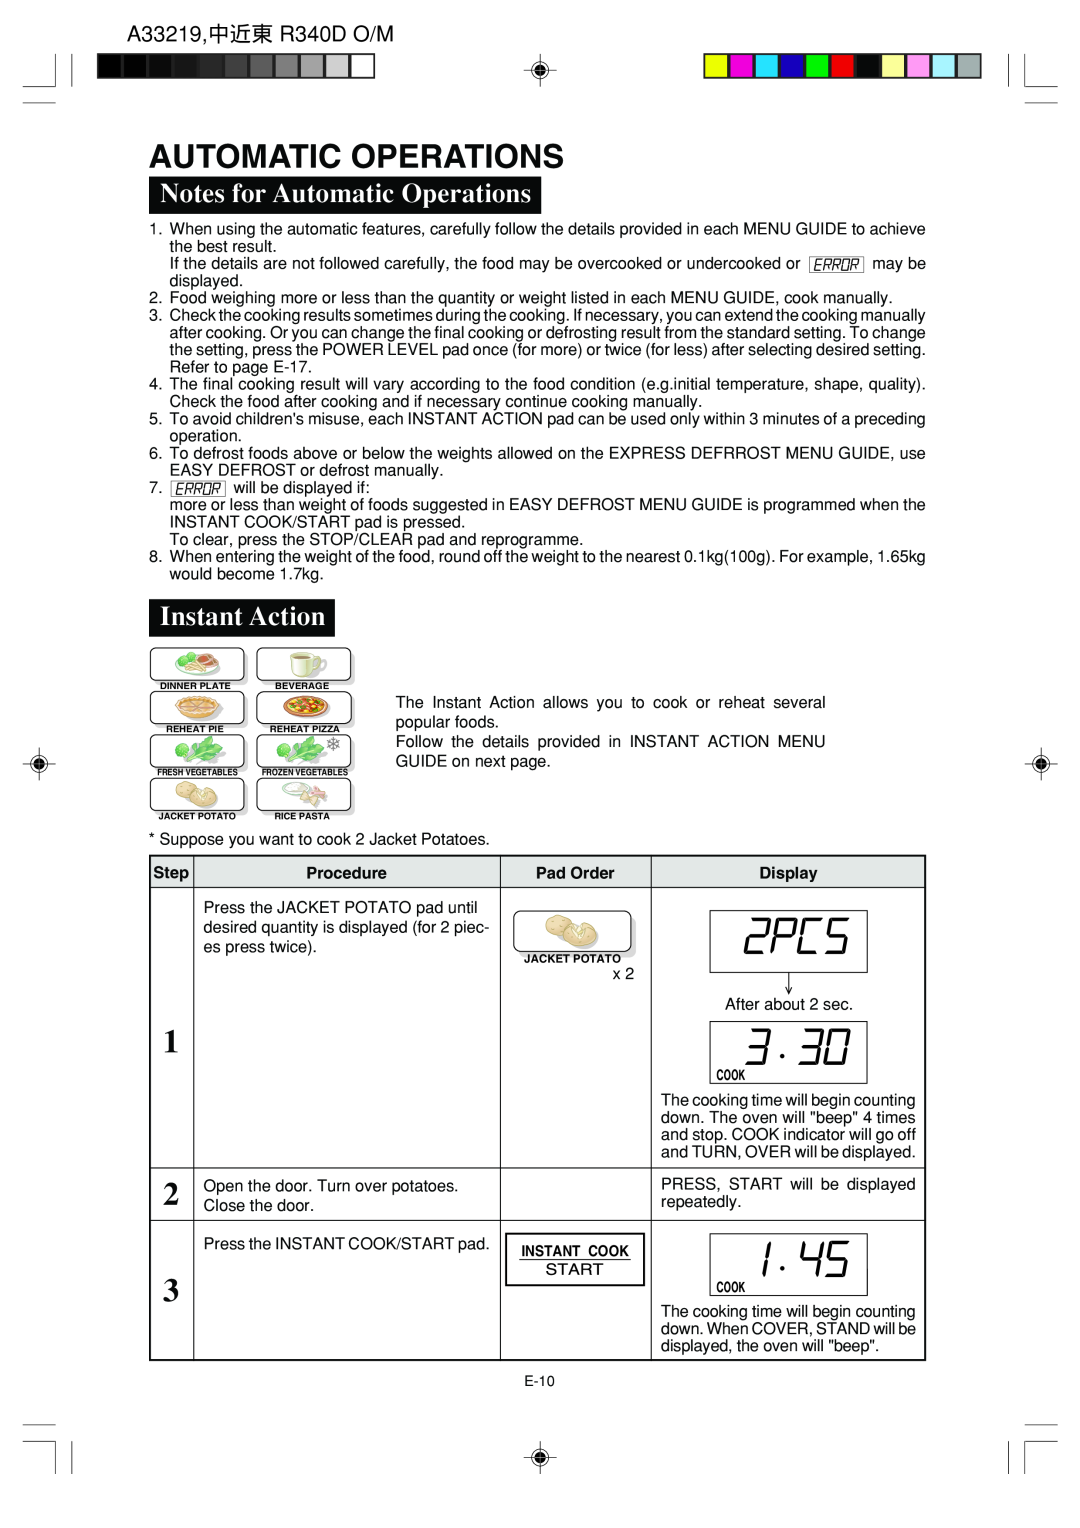 Sharp R-340D operation manual Notes for Automatic Operations, Instant Action, A33219,中近東 R340D O/M 